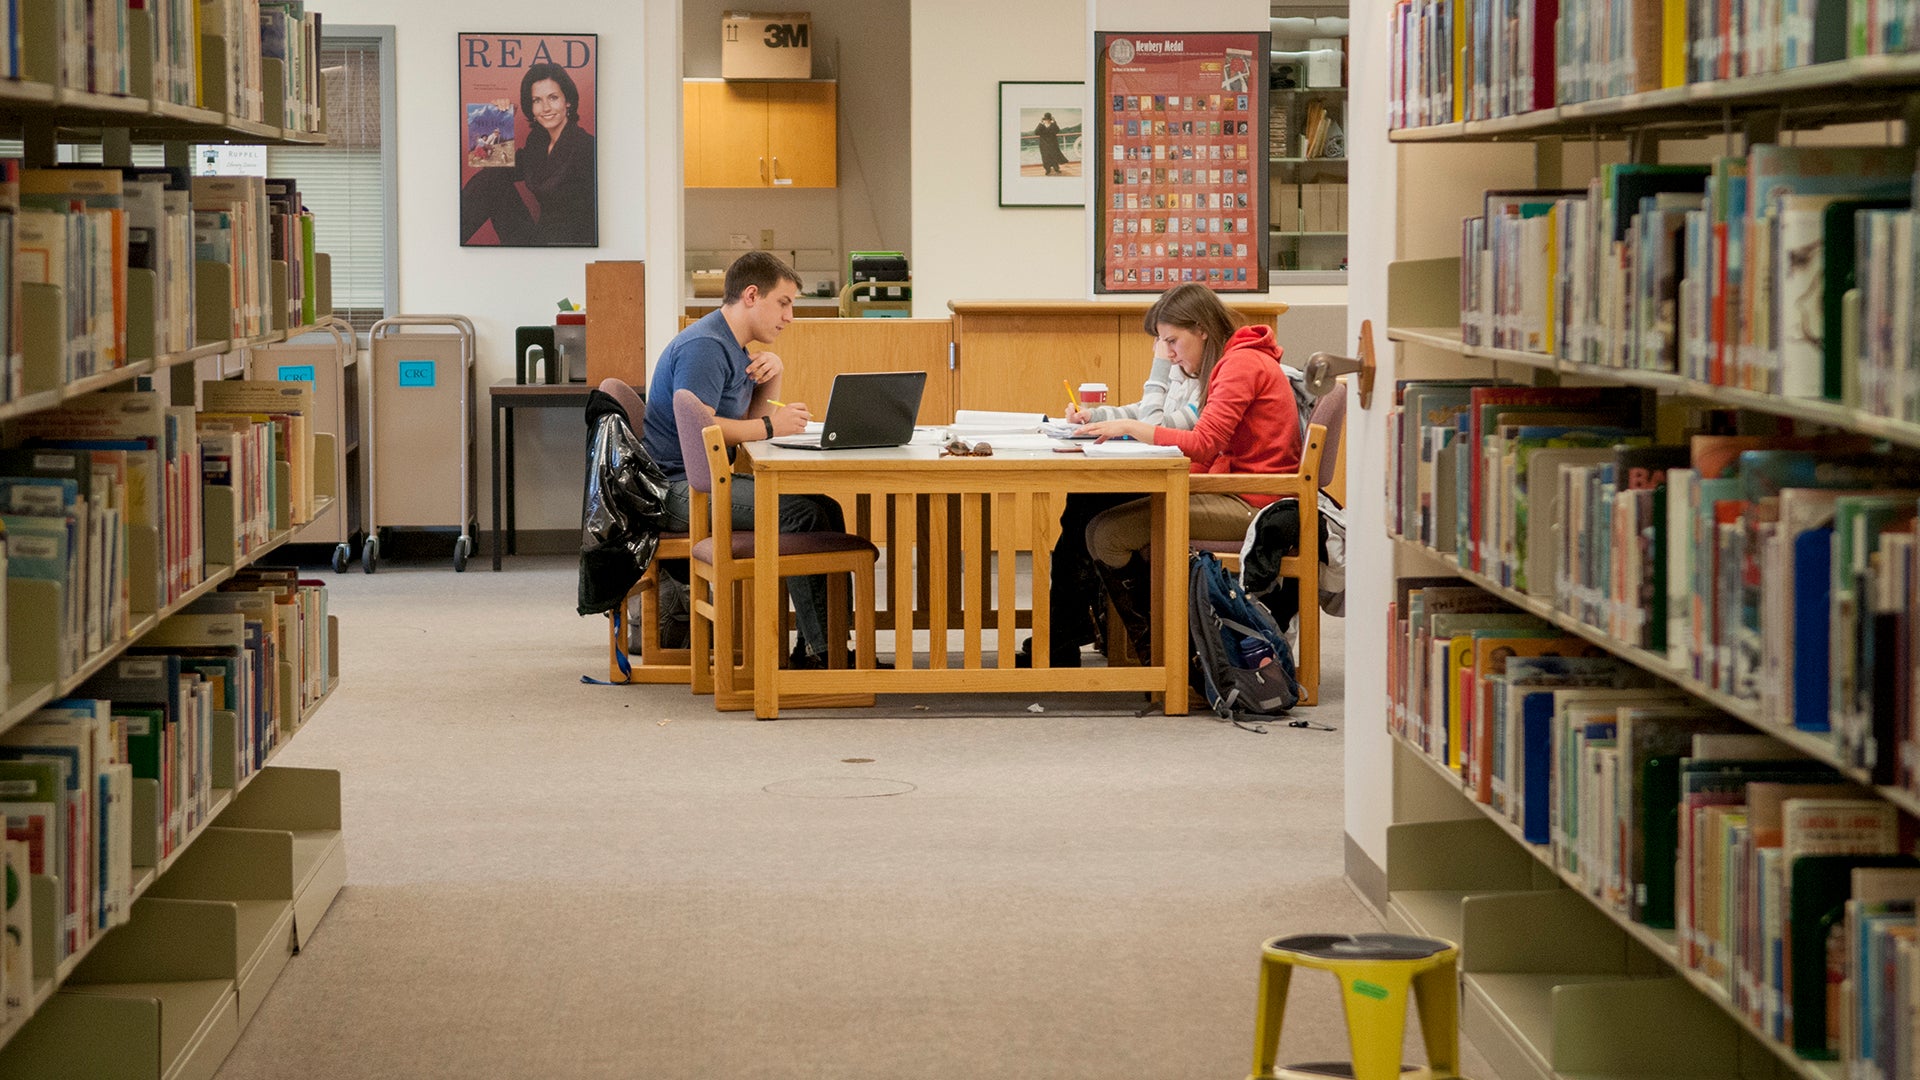 Students studying together in the library